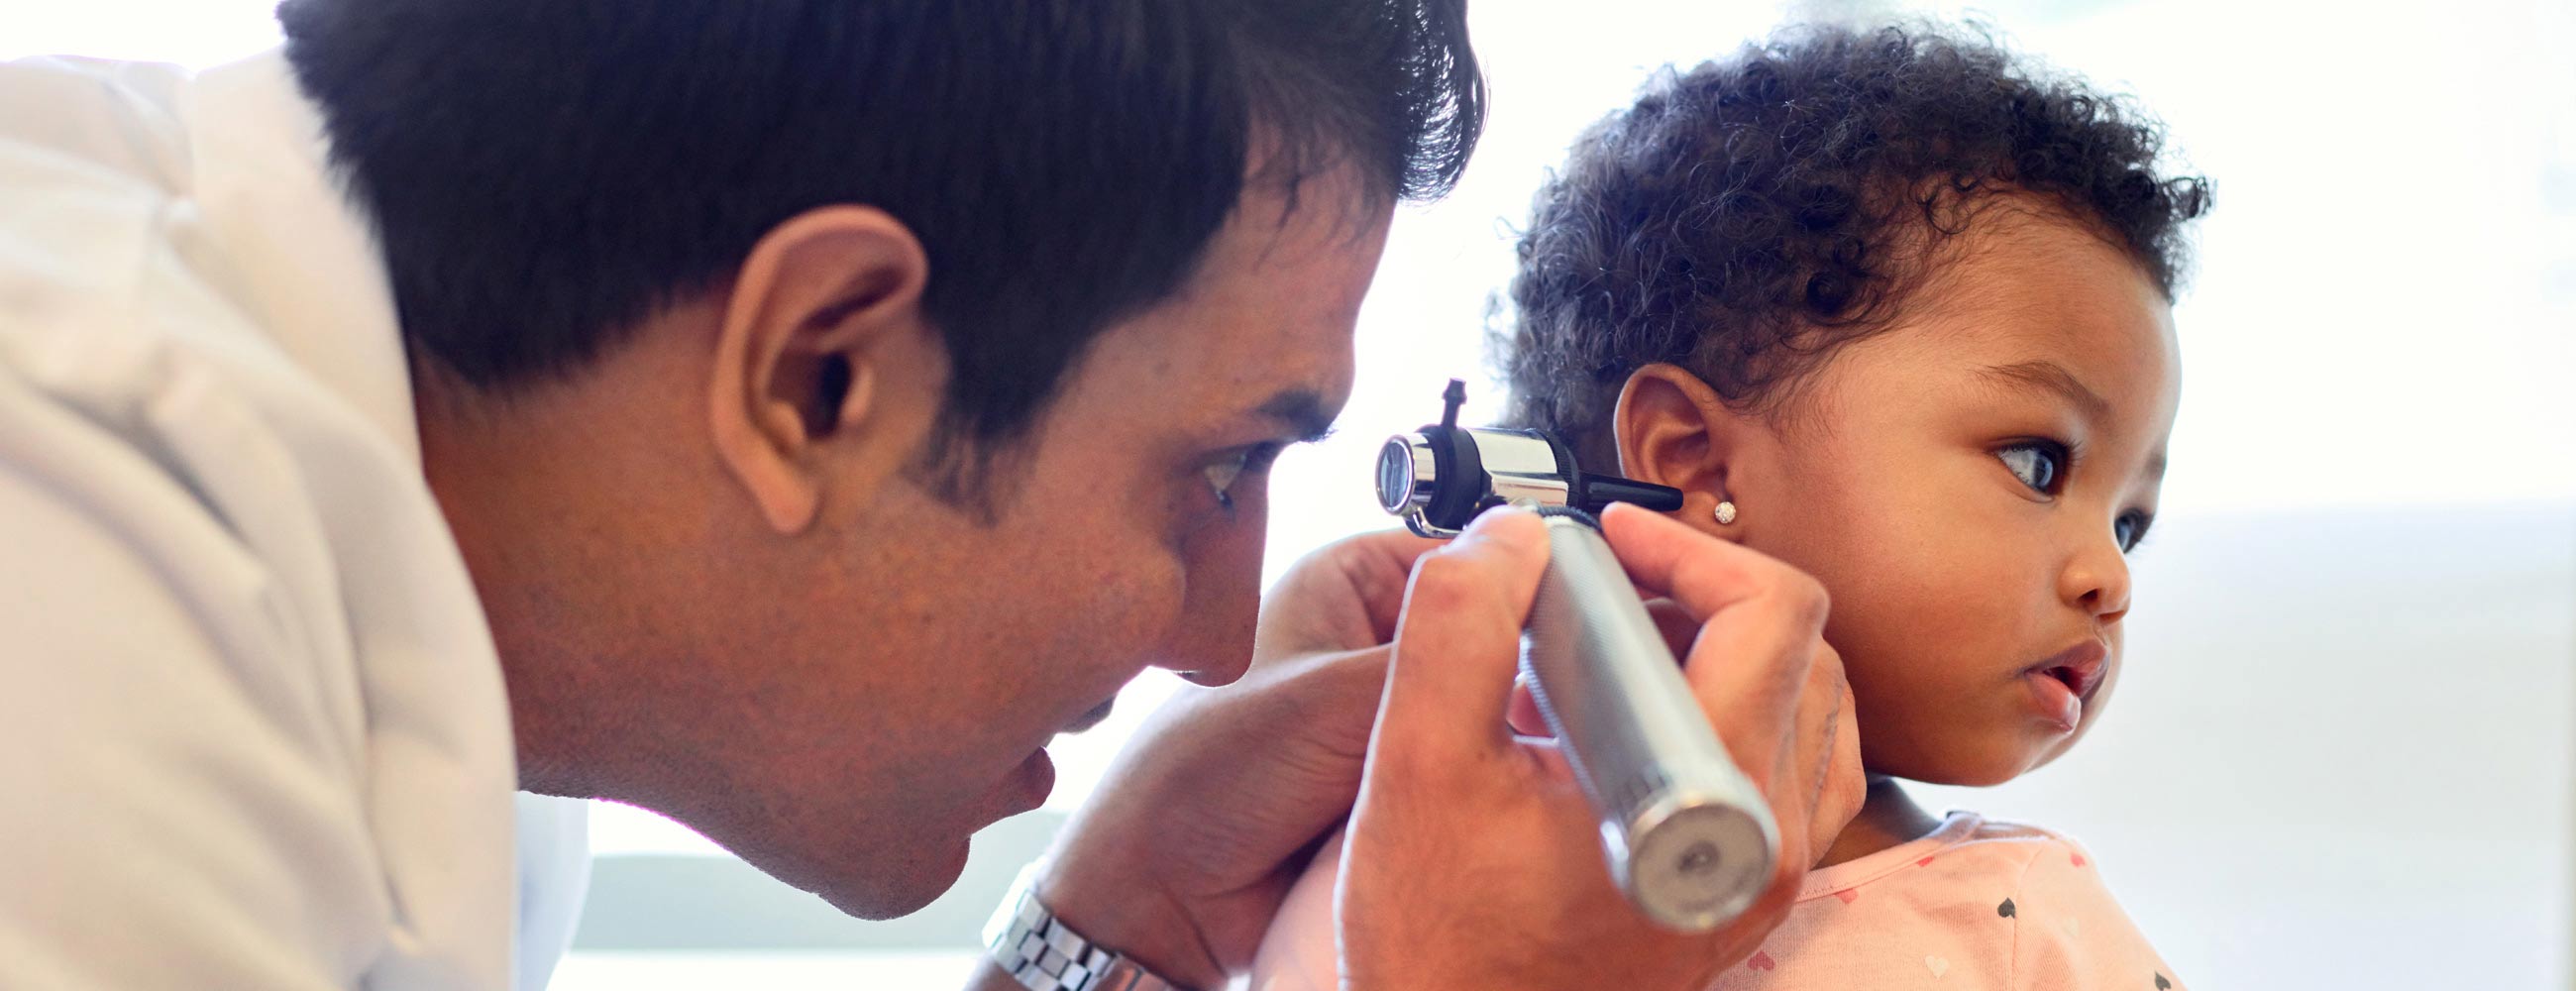 A male physician looking in the ear of a young toddler girl.